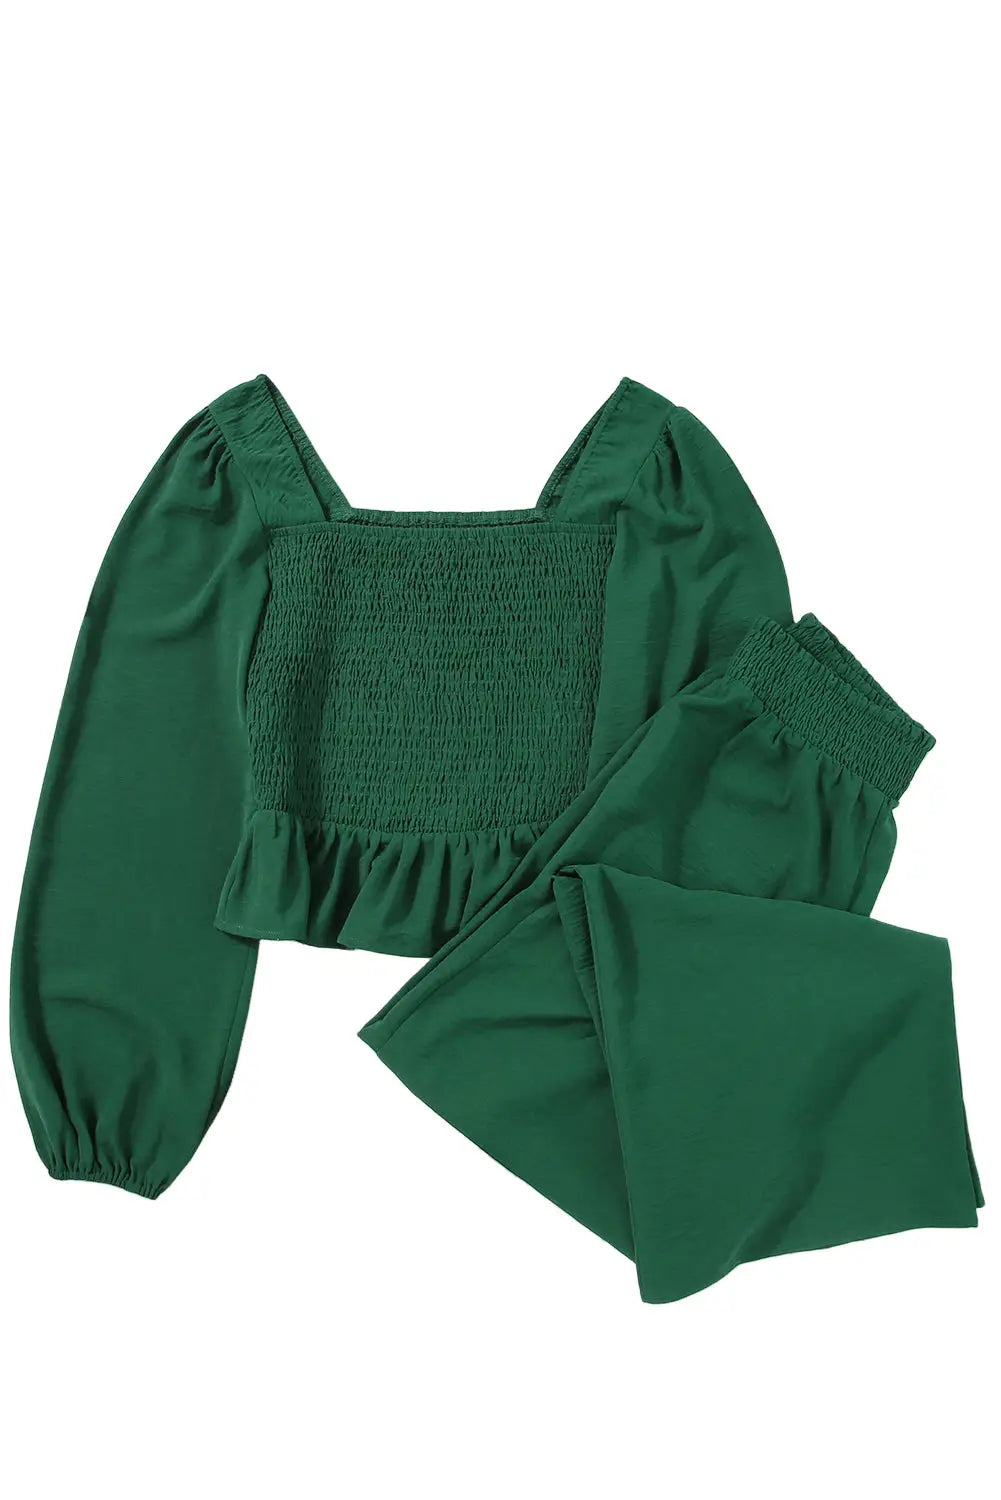 Green square neck smocked peplum top and pants set - sets